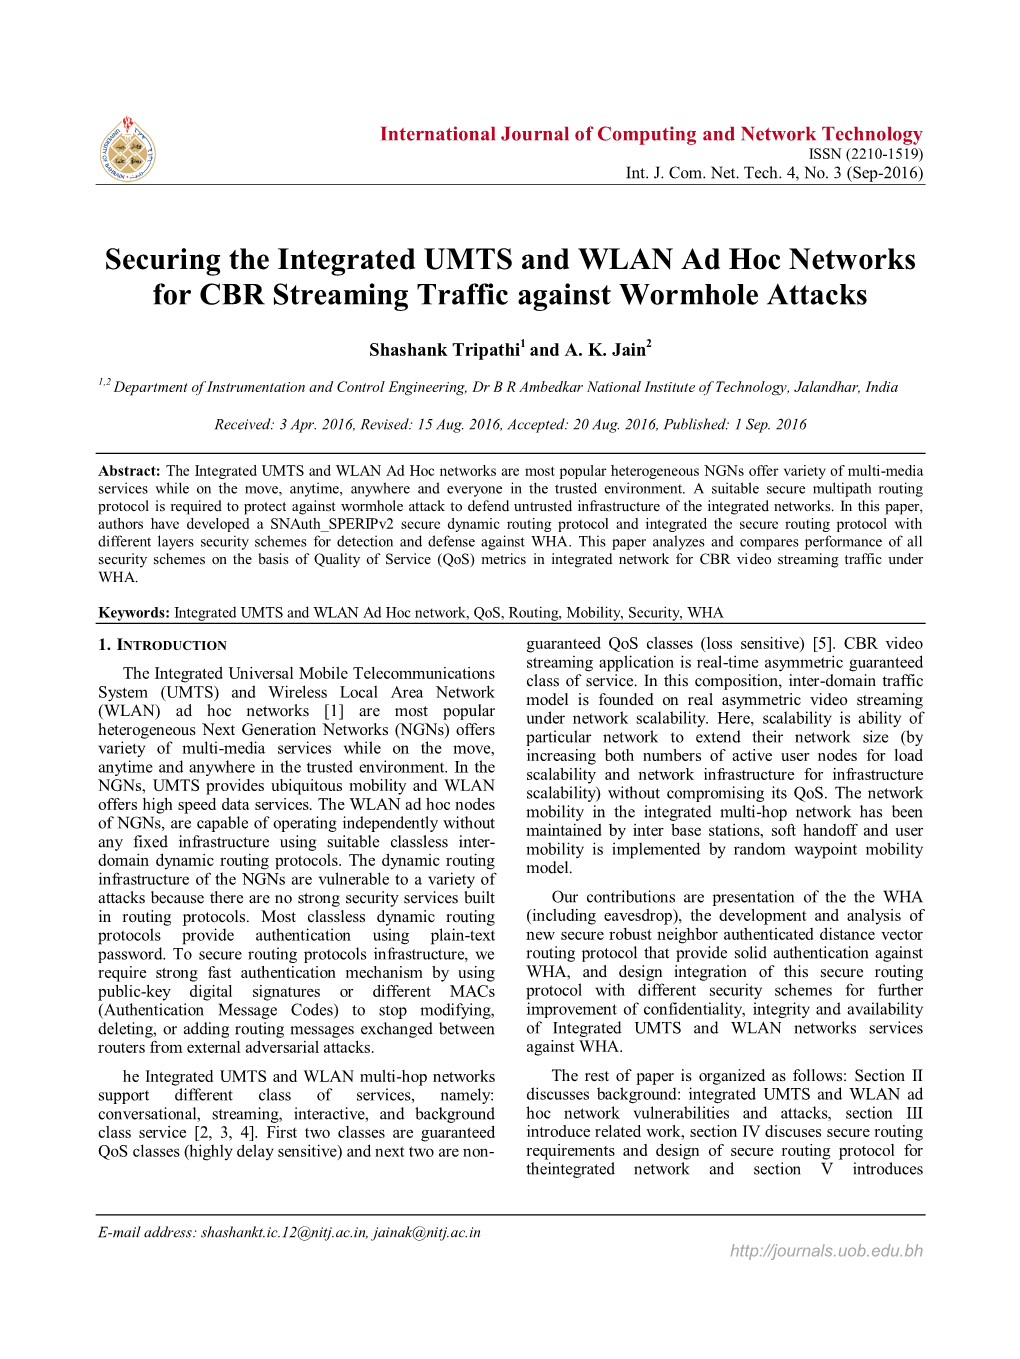 Securing the Integrated UMTS and WLAN Ad Hoc Networks for CBR Streaming Traffic Against Wormhole Attacks